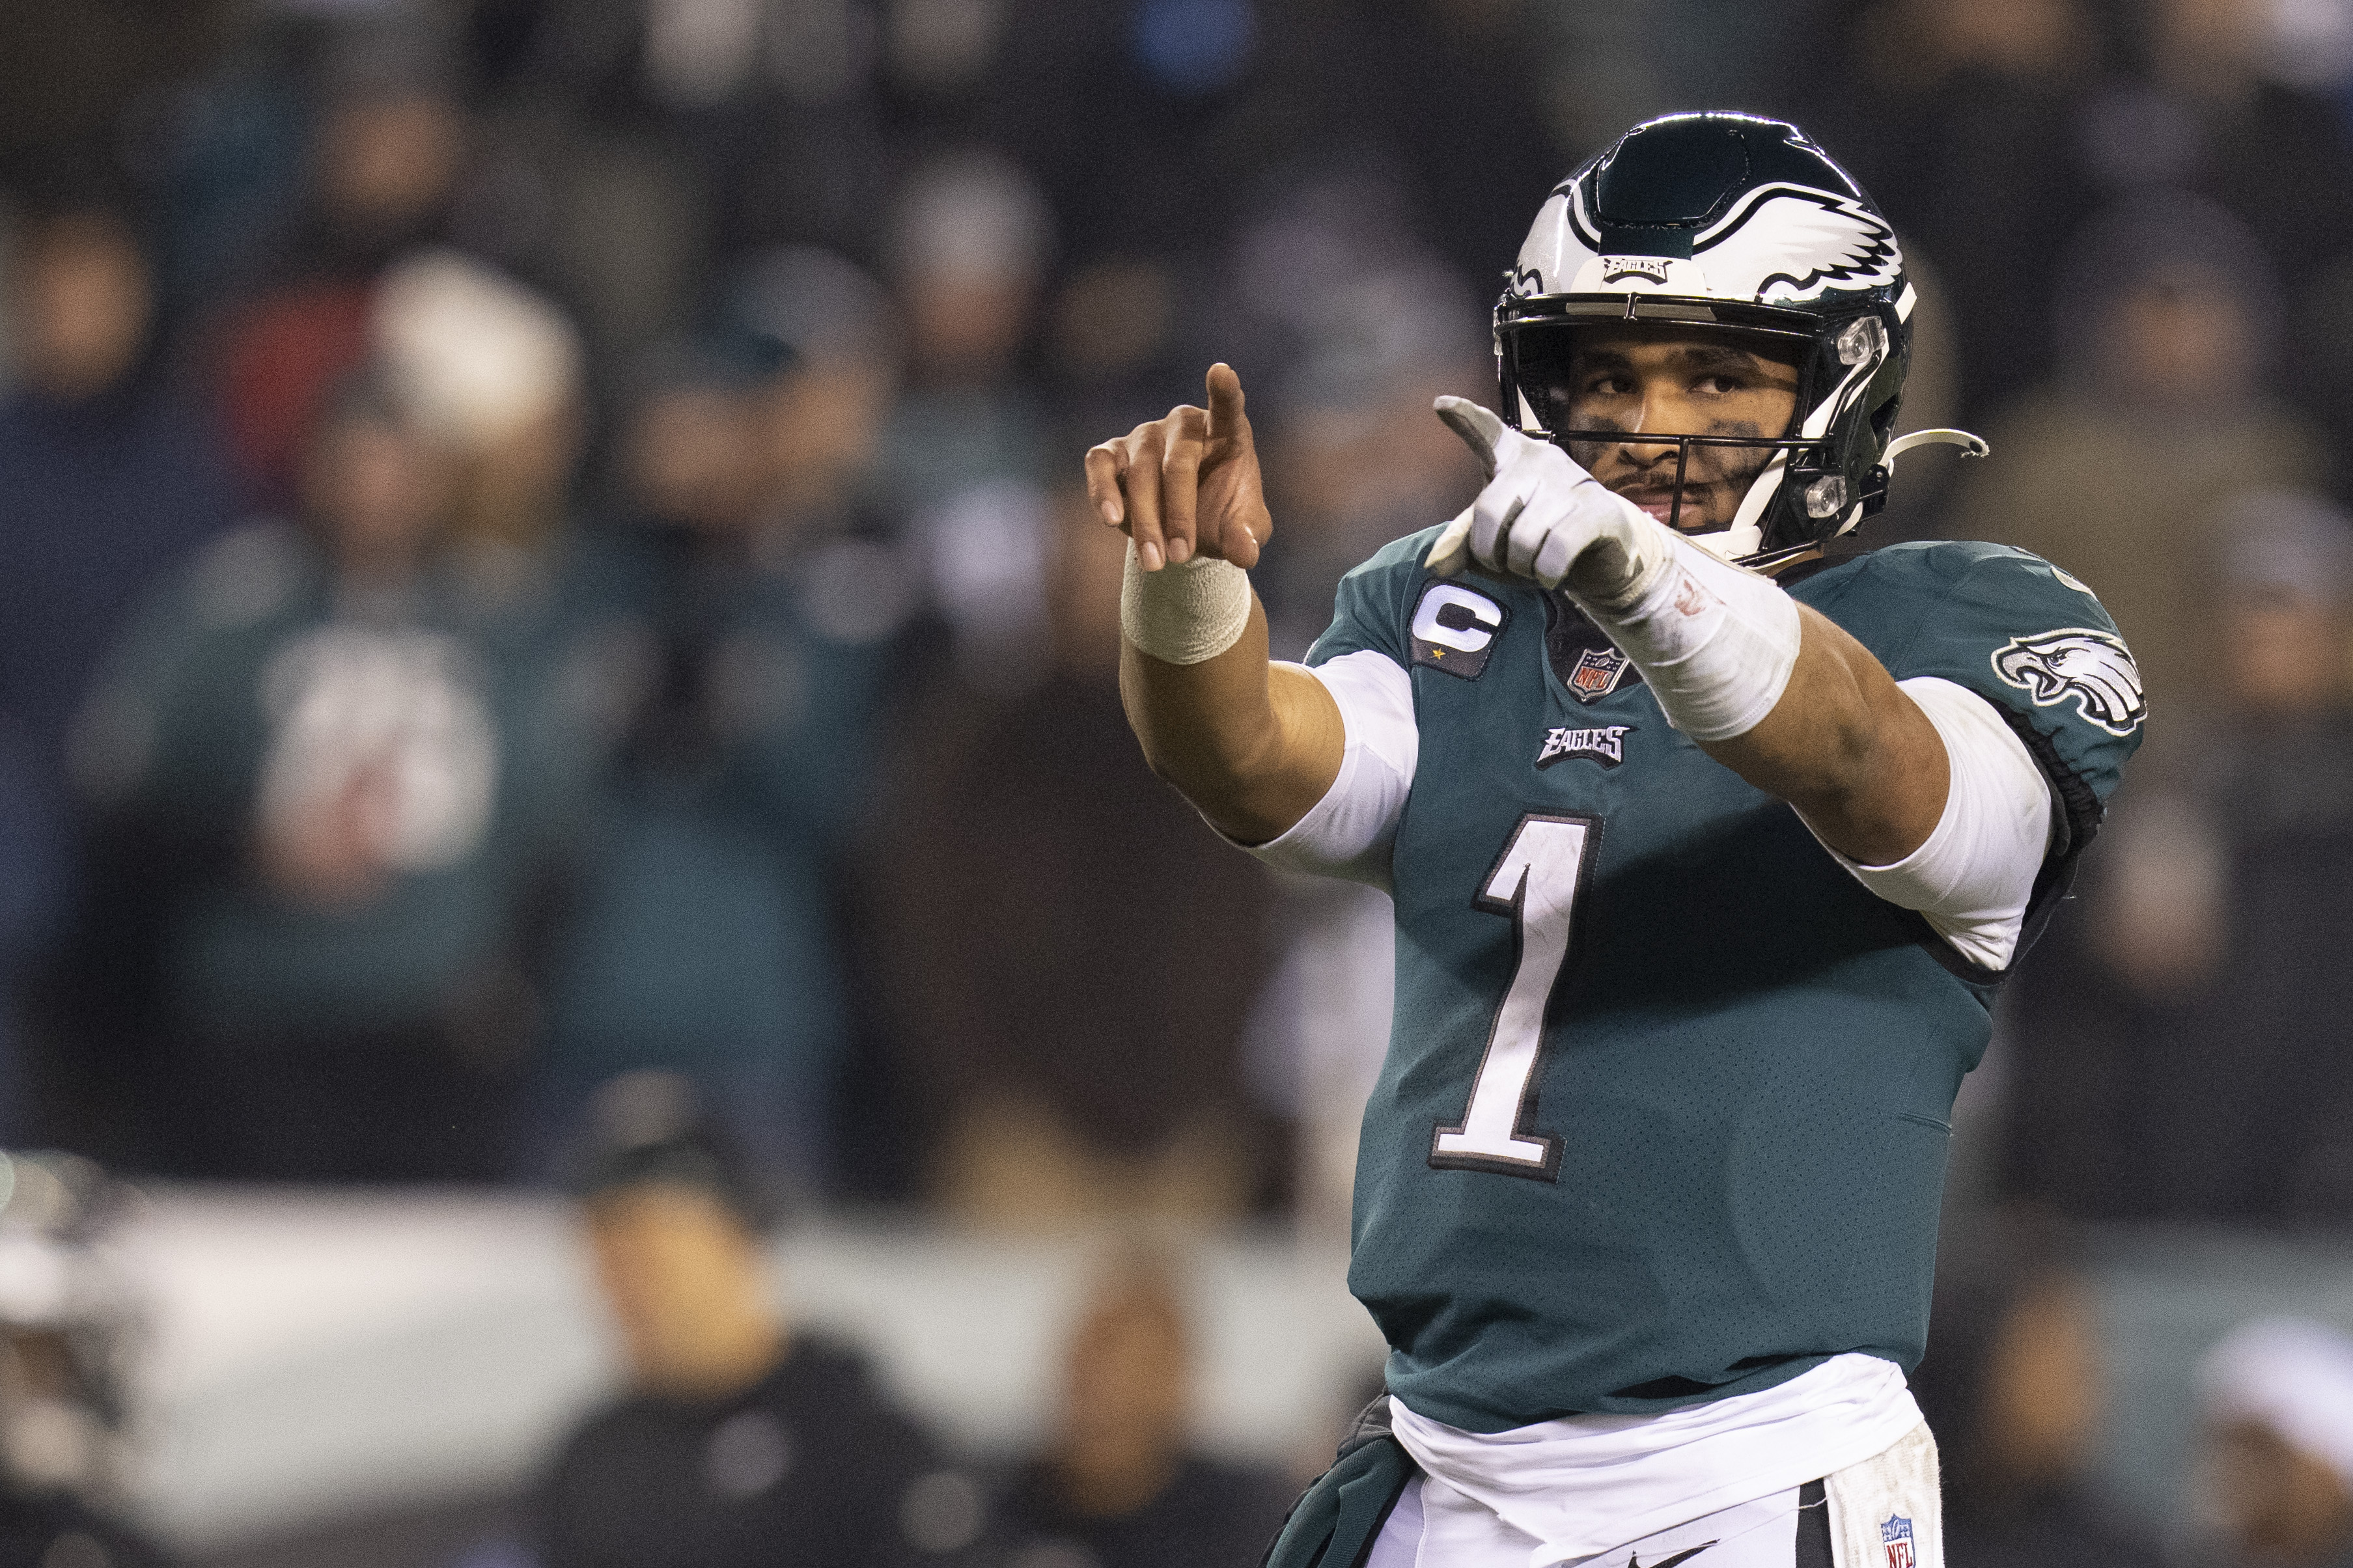 Jalen Hurts and the Eagles can clinch a playoff spot in Week 17.